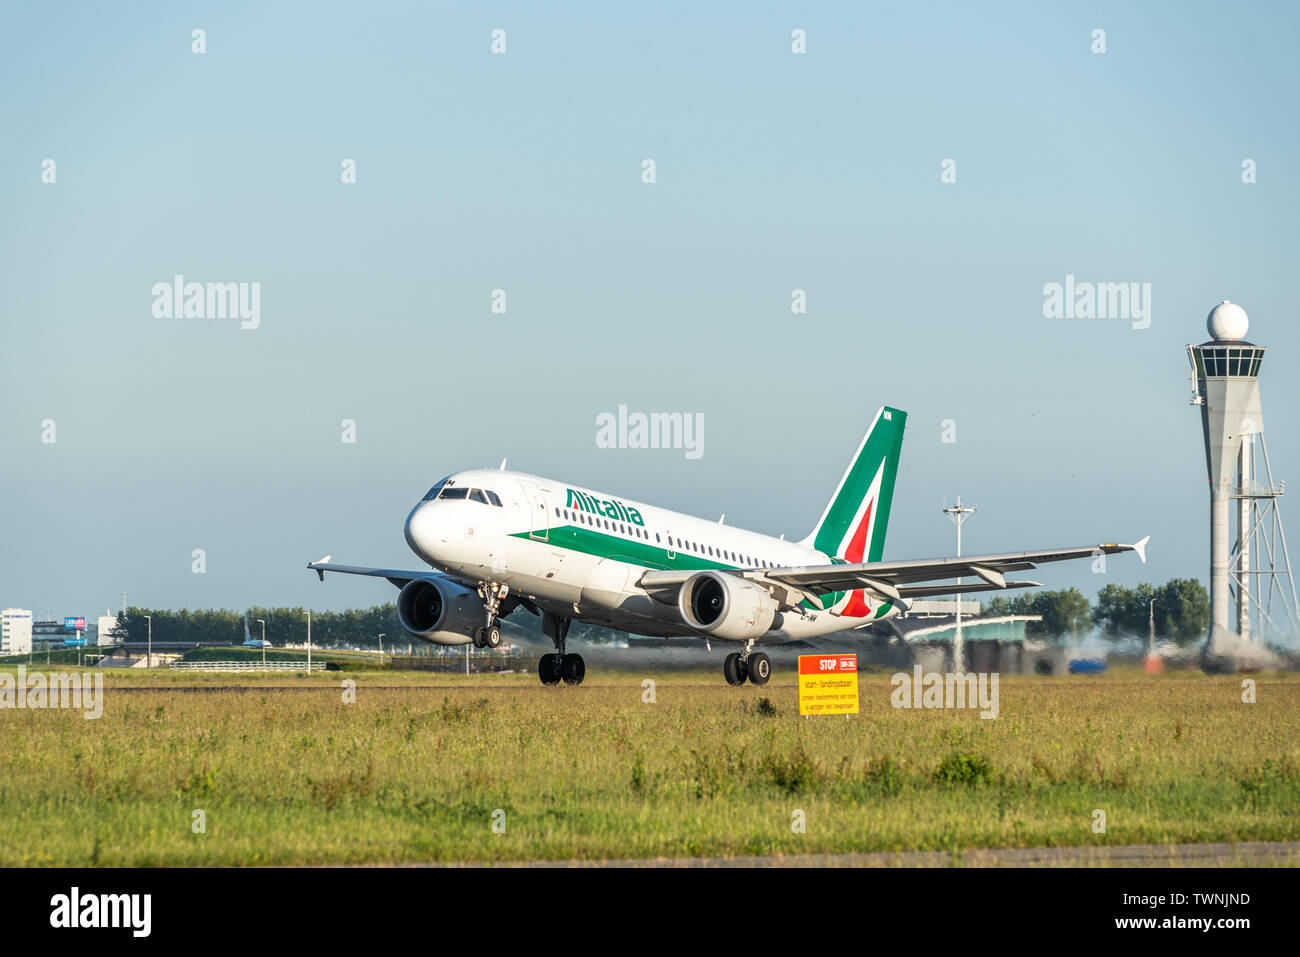 A picture of an Alitalia aircraft taking off from Schiphol airport Stock Photo